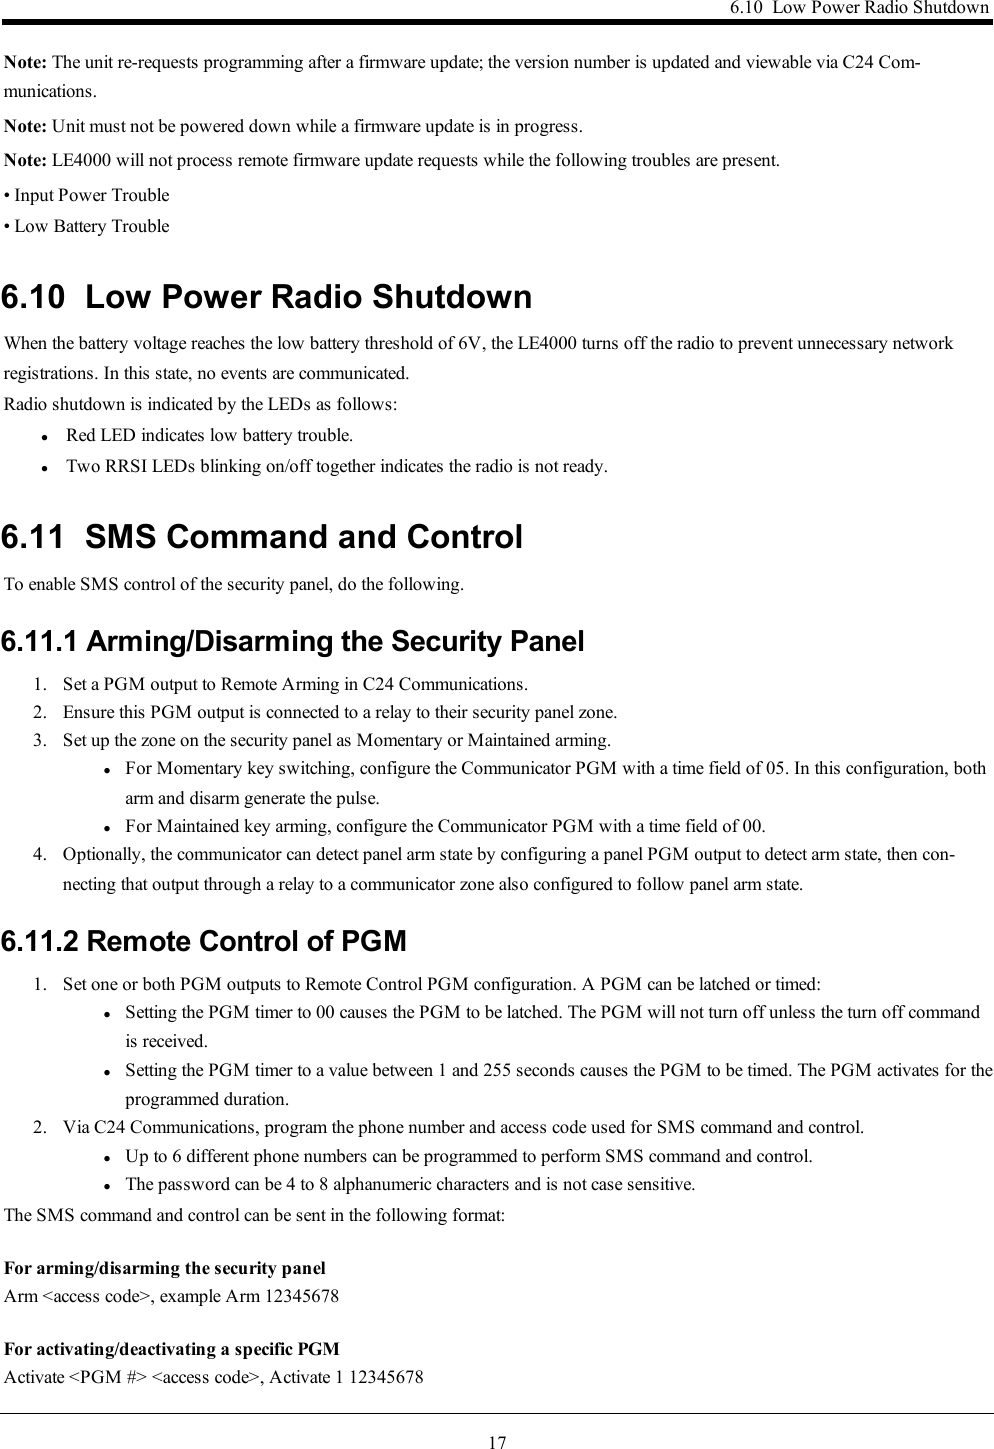 176.10 Low Power Radio ShutdownNote: The unit re-requests programming after a firmware update; the version number is updated and viewable via C24 Com-munications.Note: Unit must not be powered down while a firmware update is in progress.Note: LE4000 will not process remote firmware update requests while the following troubles are present.• Input Power Trouble• Low Battery Trouble6.10 Low Power Radio ShutdownWhen the battery voltage reaches the low battery threshold of 6V, the LE4000 turns off the radio to prevent unnecessary networkregistrations. In this state, no events are communicated.Radio shutdown is indicated by the LEDs as follows:lRed LED indicates low battery trouble.lTwo RRSI LEDs blinking on/off together indicates the radio is not ready.6.11 SMS Command and ControlTo enable SMS control of the security panel, do the following.6.11.1 Arming/Disarming the Security Panel1. Set a PGM output to Remote Arming in C24 Communications.2. Ensure this PGM output is connected to a relay to their security panel zone.3. Set up the zone on the security panel as Momentary or Maintained arming.lFor Momentary key switching, configure the Communicator PGM with a time field of 05. In this configuration, botharm and disarm generate the pulse.lFor Maintained key arming, configure the Communicator PGM with a time field of 00.4. Optionally, the communicator can detect panel arm state by configuring a panel PGM output to detect arm state, then con-necting that output through a relay to a communicator zone also configured to follow panel arm state.6.11.2 Remote Control of PGM1. Set one or both PGM outputs to Remote Control PGM configuration. A PGM can be latched or timed:lSetting the PGM timer to 00 causes the PGM to be latched. The PGM will not turn off unless the turn off commandis received.lSetting the PGM timer to a value between 1 and 255 seconds causes the PGM to be timed. The PGM activates for theprogrammed duration.2. Via C24 Communications, program the phone number and access code used for SMS command and control.lUp to 6 different phone numbers can be programmed to perform SMS command and control.lThe password can be 4 to 8 alphanumeric characters and is not case sensitive.The SMS command and control can be sent in the following format:For arming/disarming the security panelArm &lt;access code&gt;, example Arm 12345678For activating/deactivating a specific PGMActivate &lt;PGM #&gt; &lt;access code&gt;, Activate 1 12345678